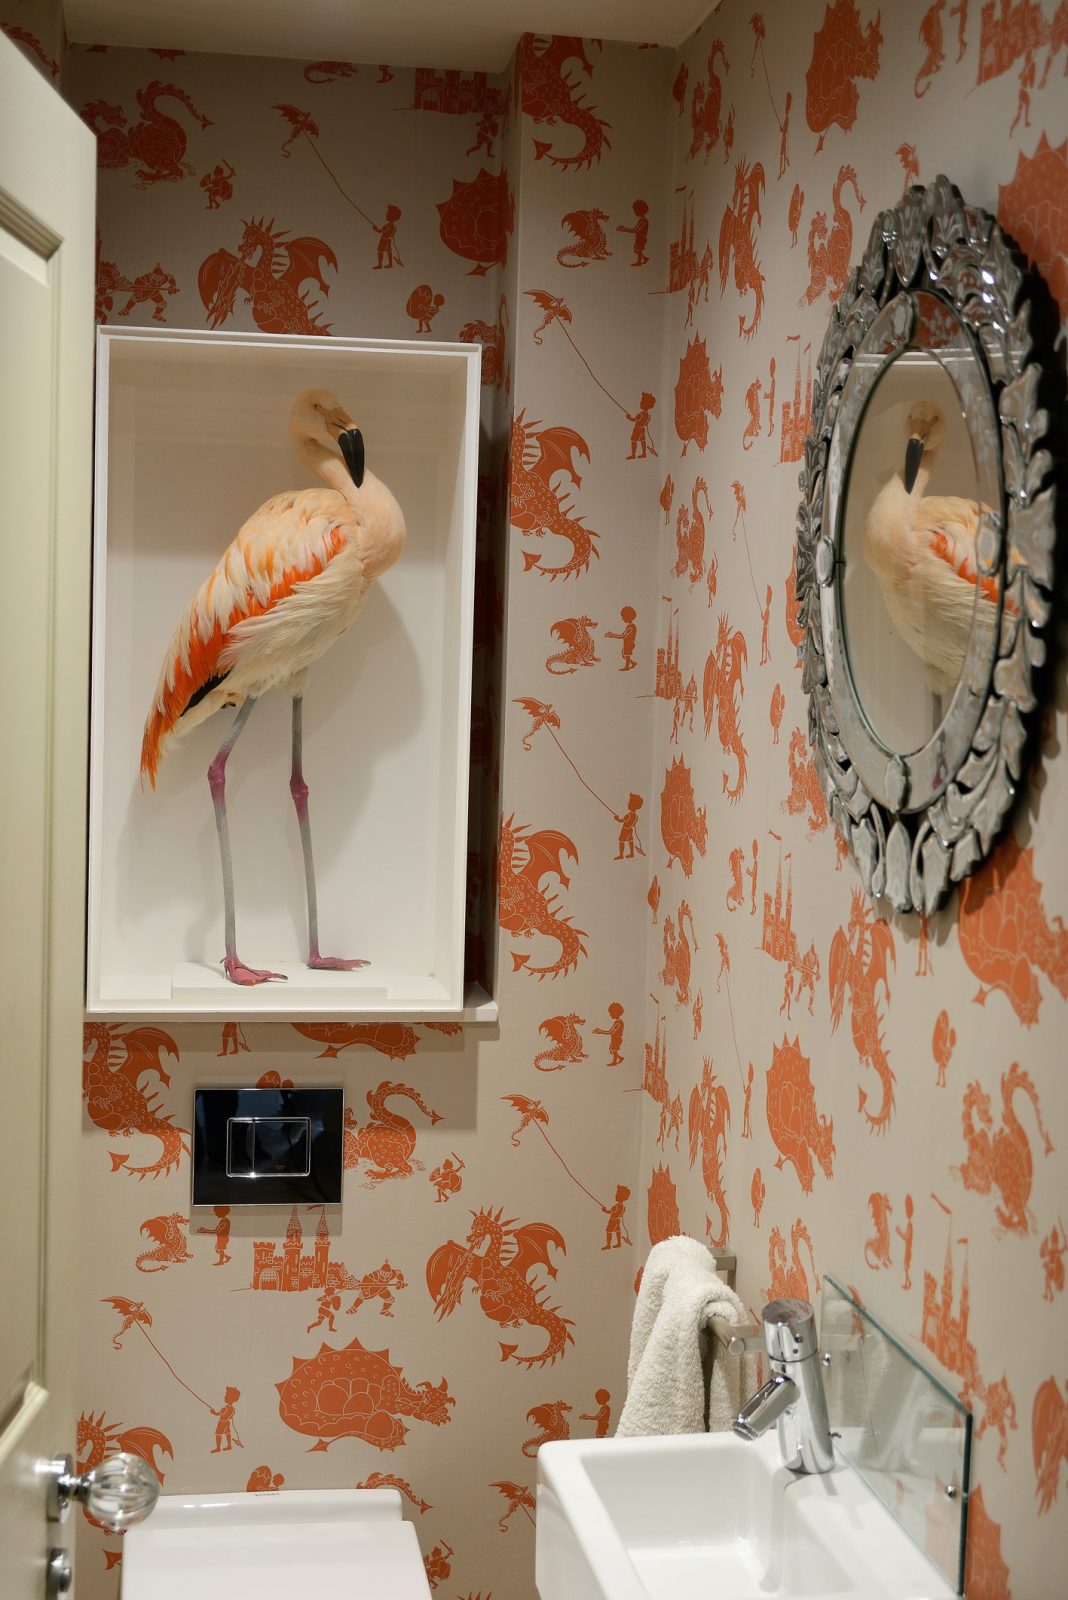 A cased pink flamingo displayed within a bathroom, an example of how antique taxidermy can compliment a modern  interior.